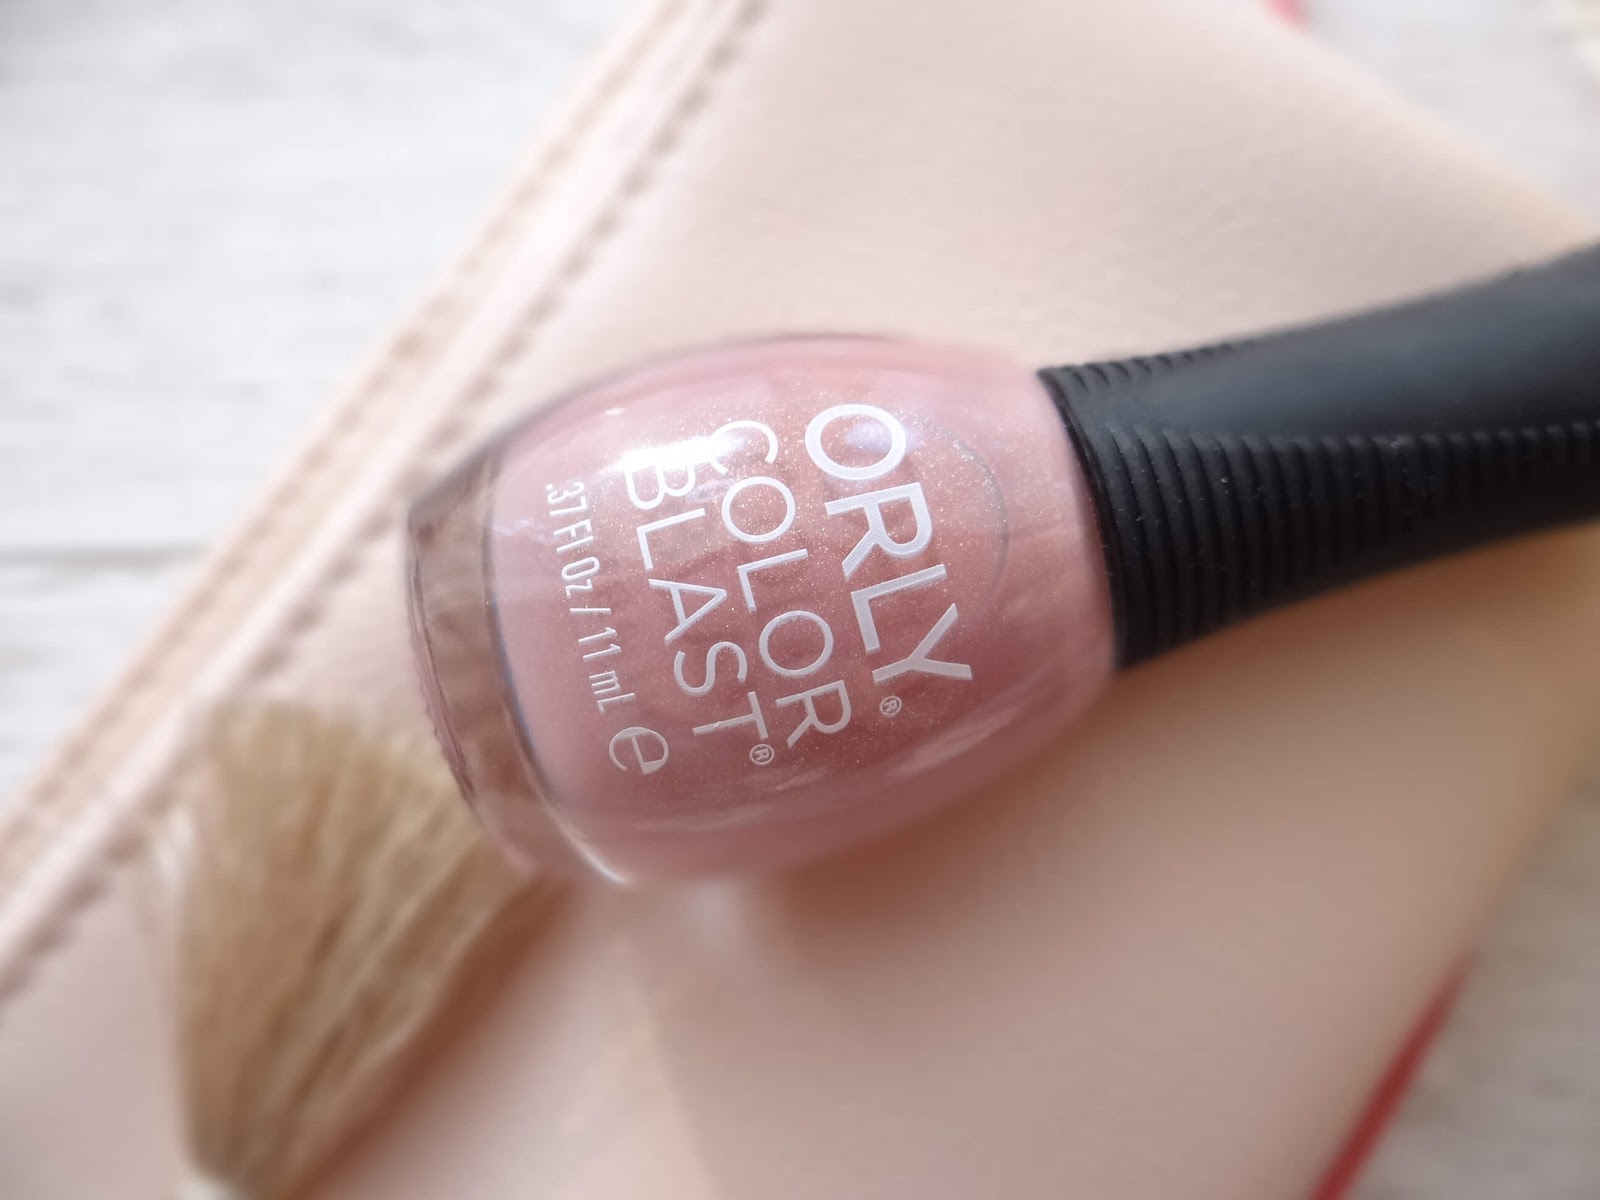 Orly Color Blast Nail Polish in "Foxy" - wide 7